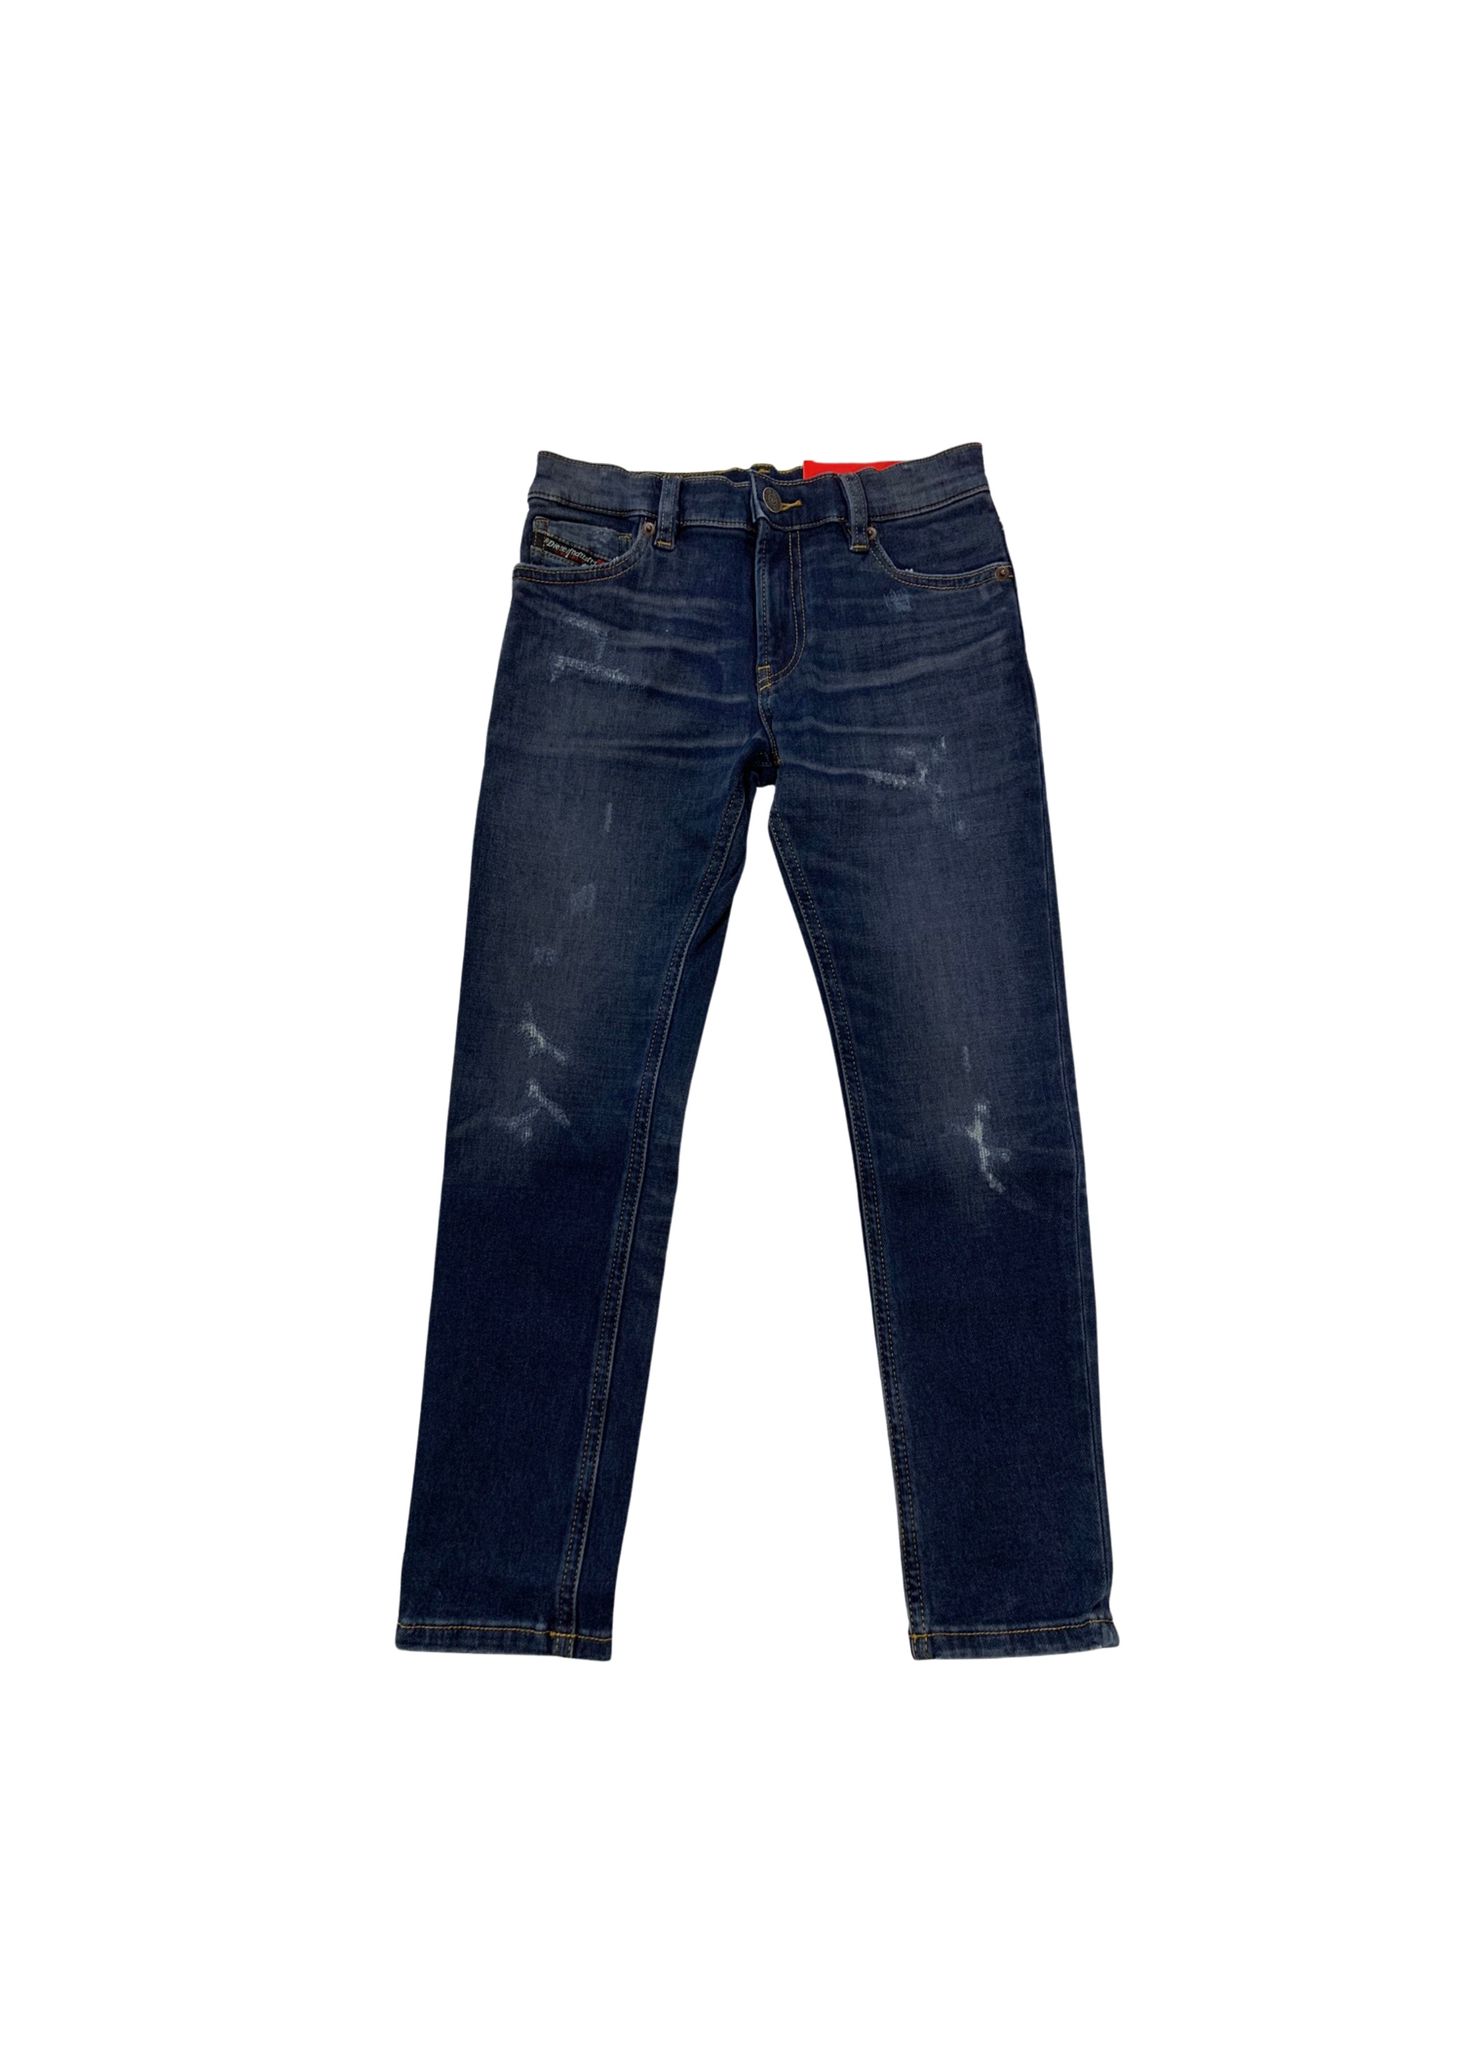 Featured image for “Diesel Jeans Effetto Vissuto”